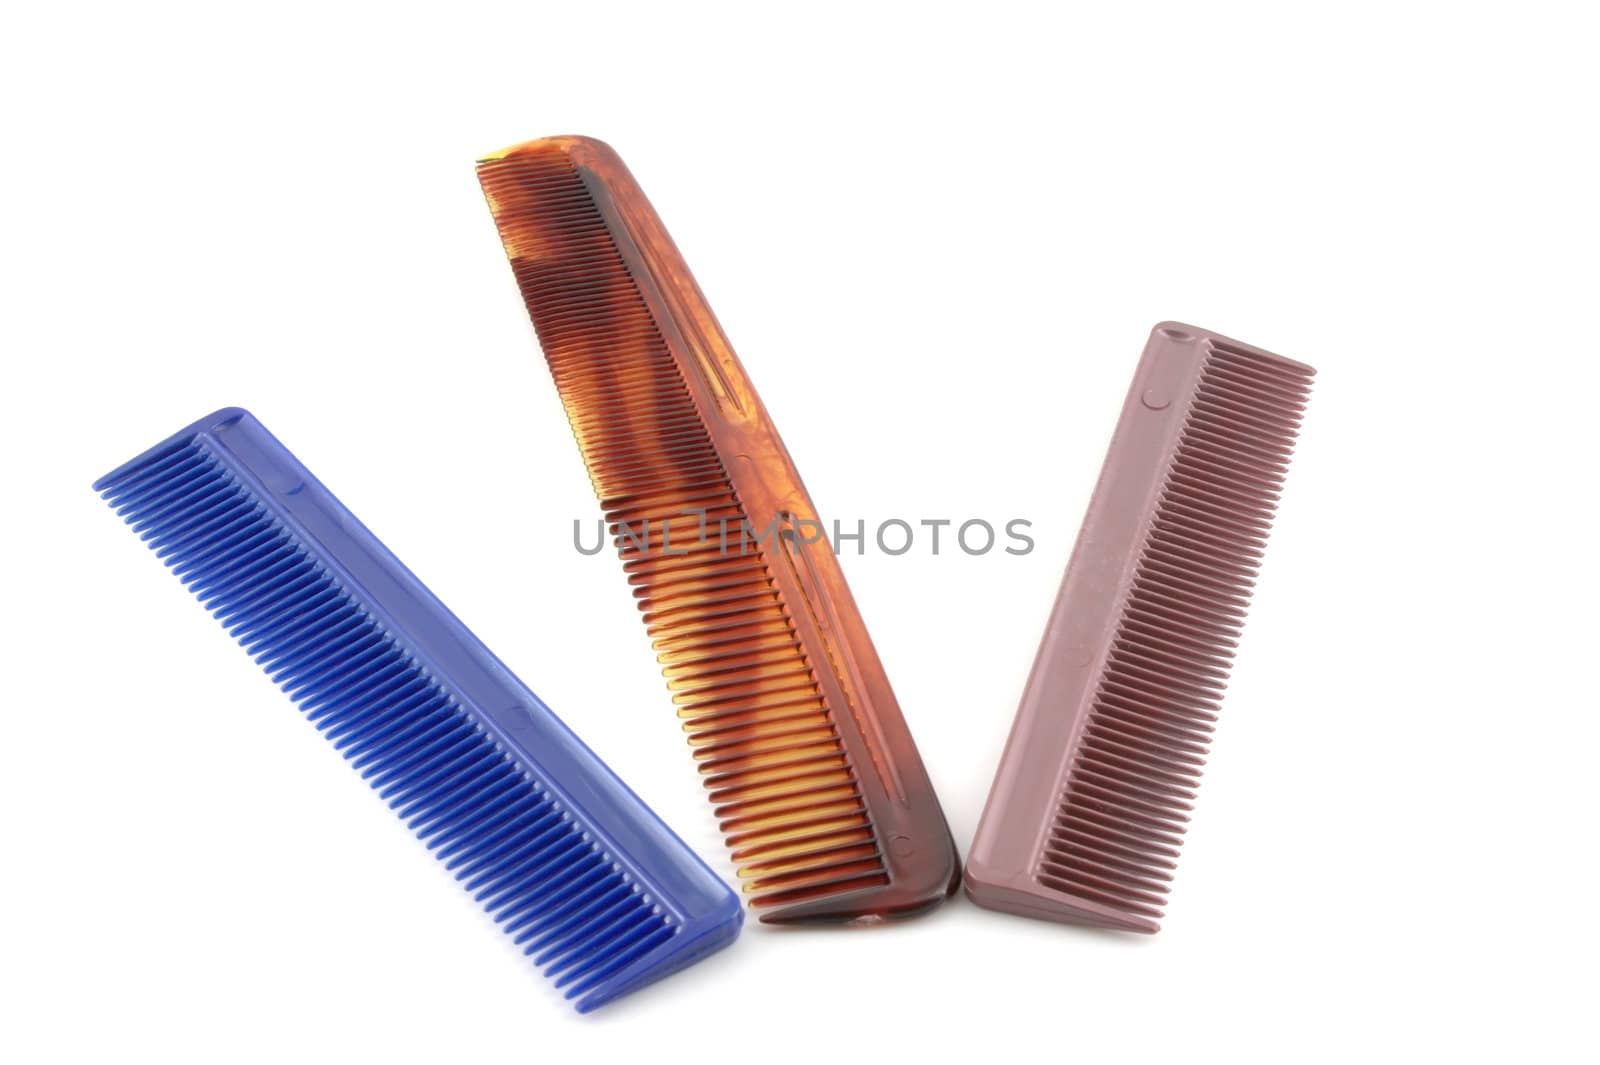 Plastic color combs over white